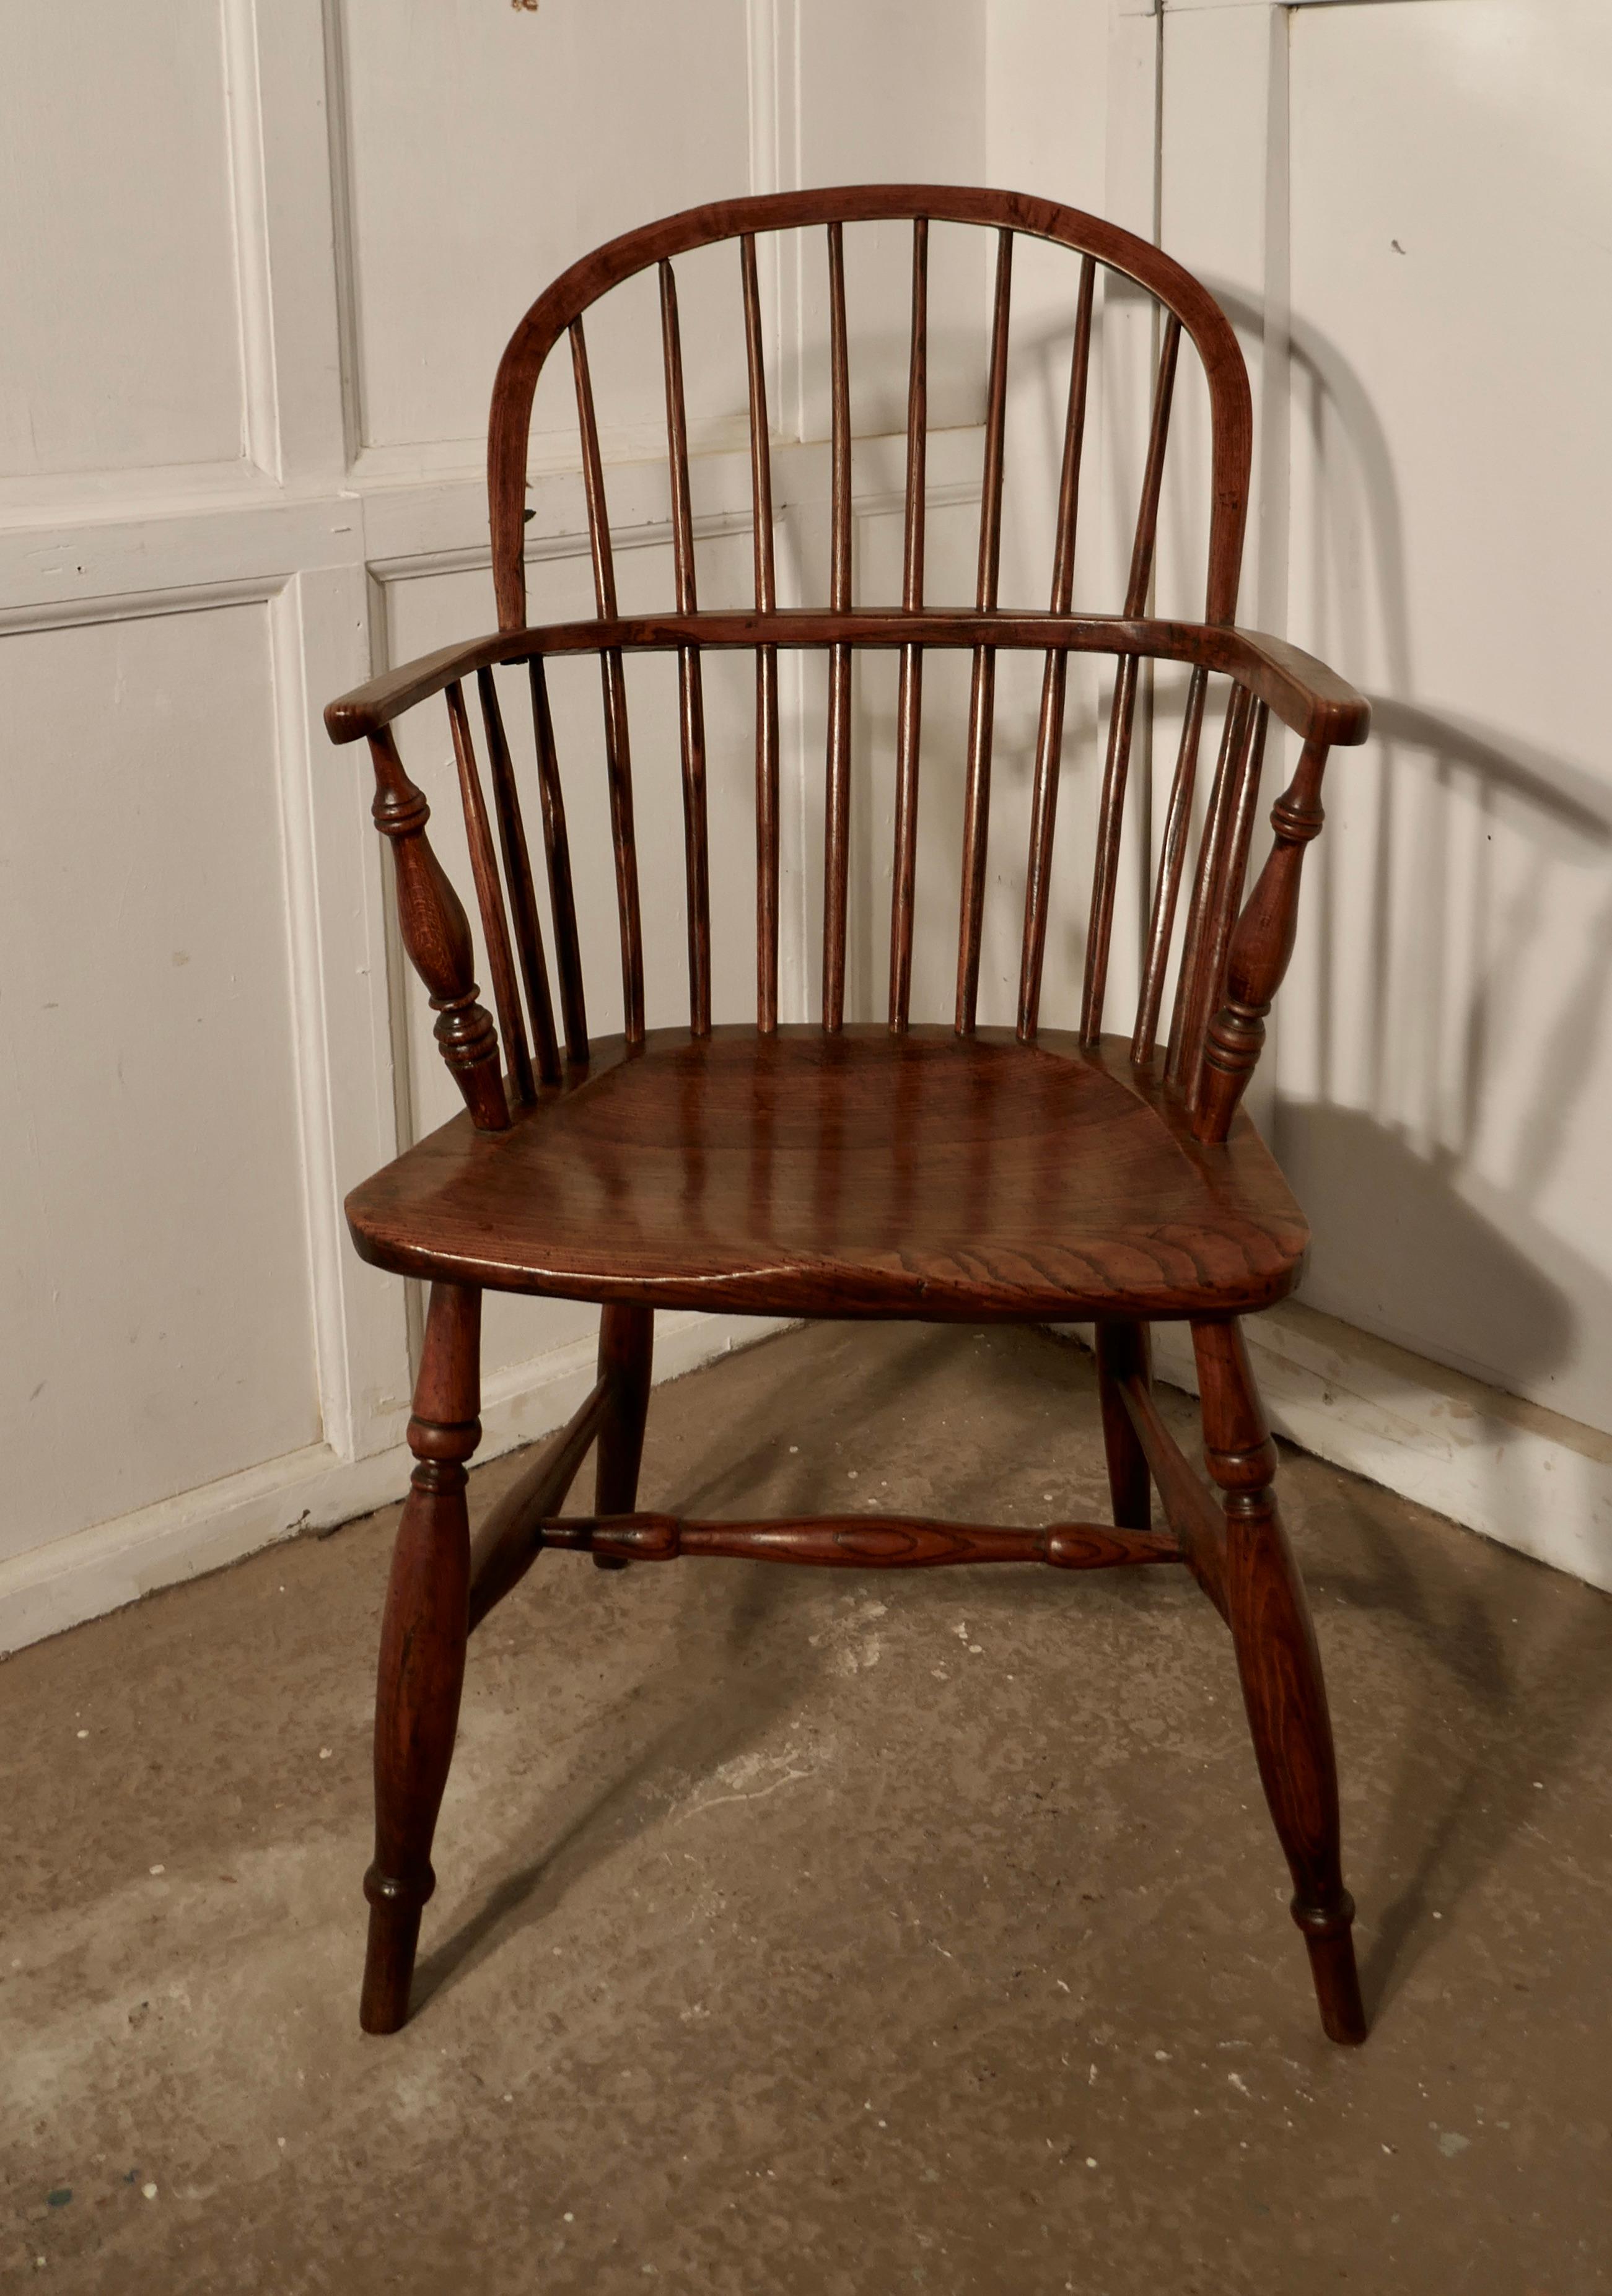 Early 19th century ash and elm hoop back country carver chair

This is an early 19th century chair with an elm seat, it has a hooped back in the traditional Windsor style with a saddle seat, turned front legs and stretchers

This lovely country